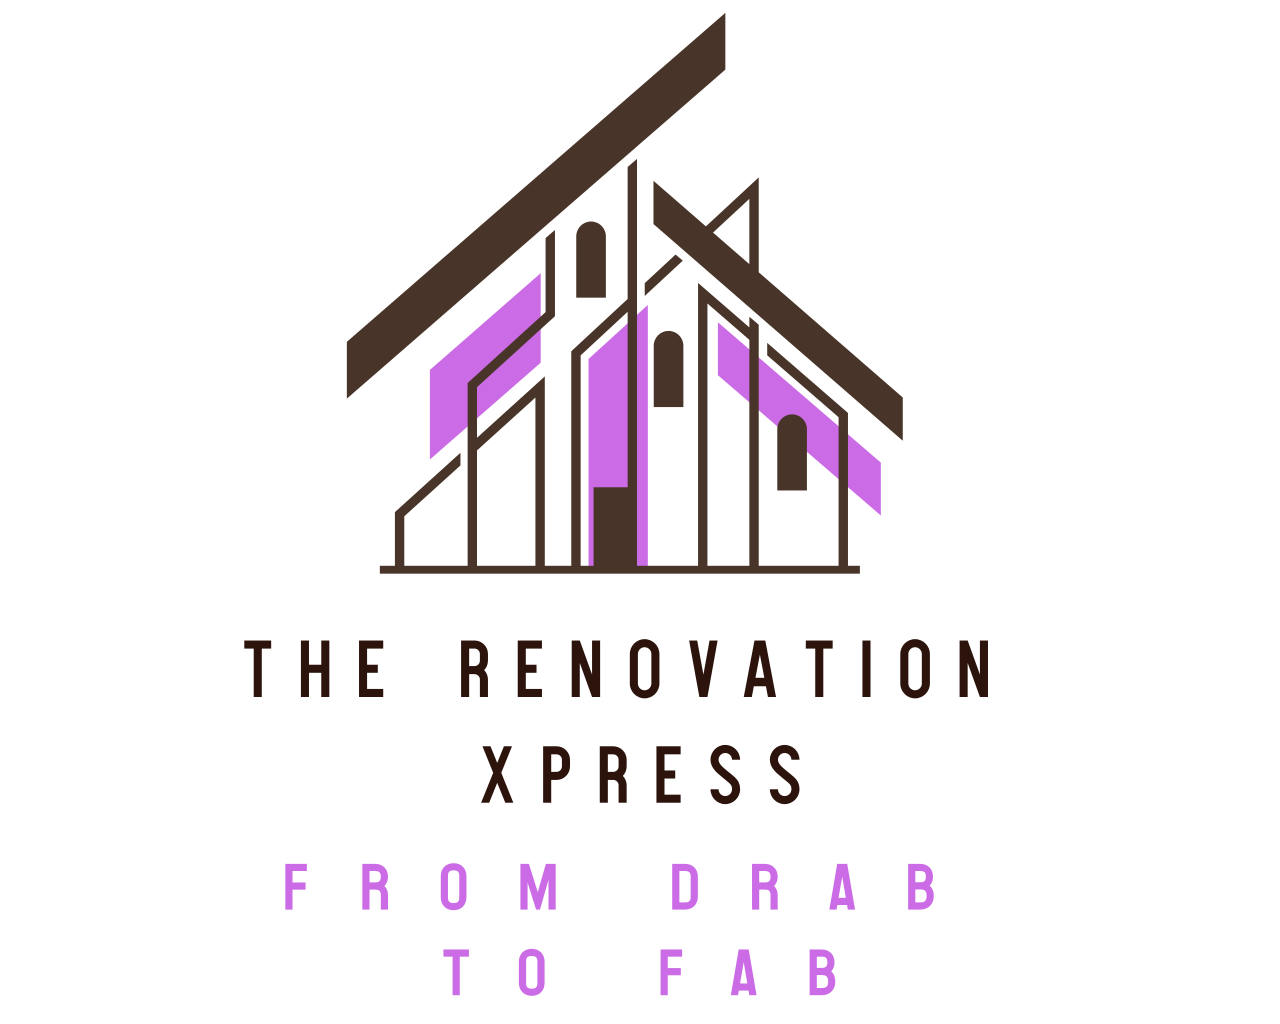 The Renovation Xpress (Painting Services)'s logo